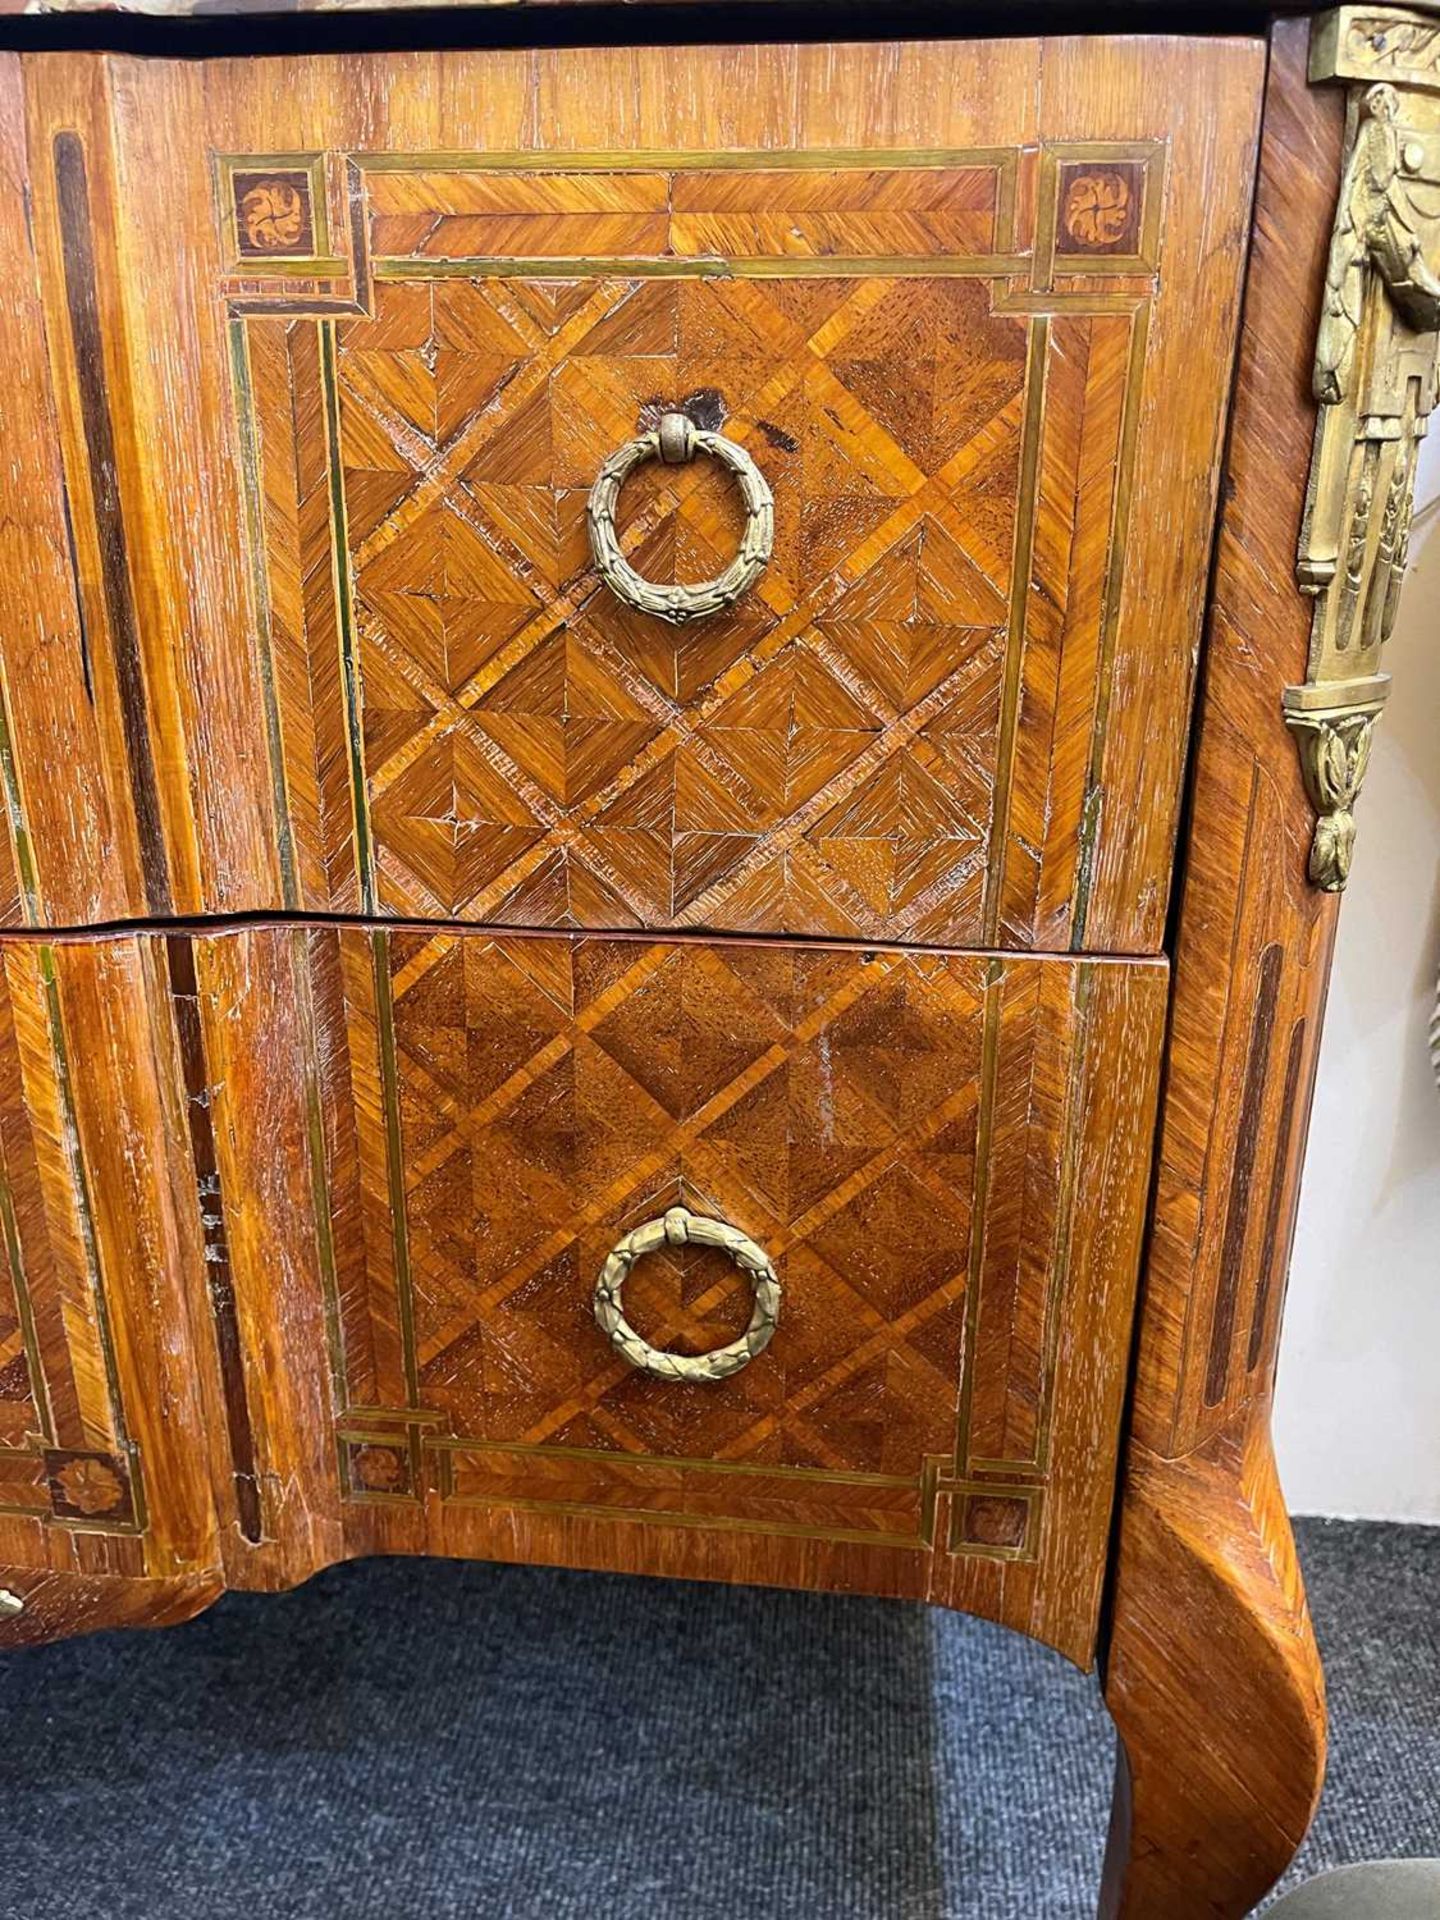 A transitional kingwood, tulipwood and marquetry commode - Image 22 of 26